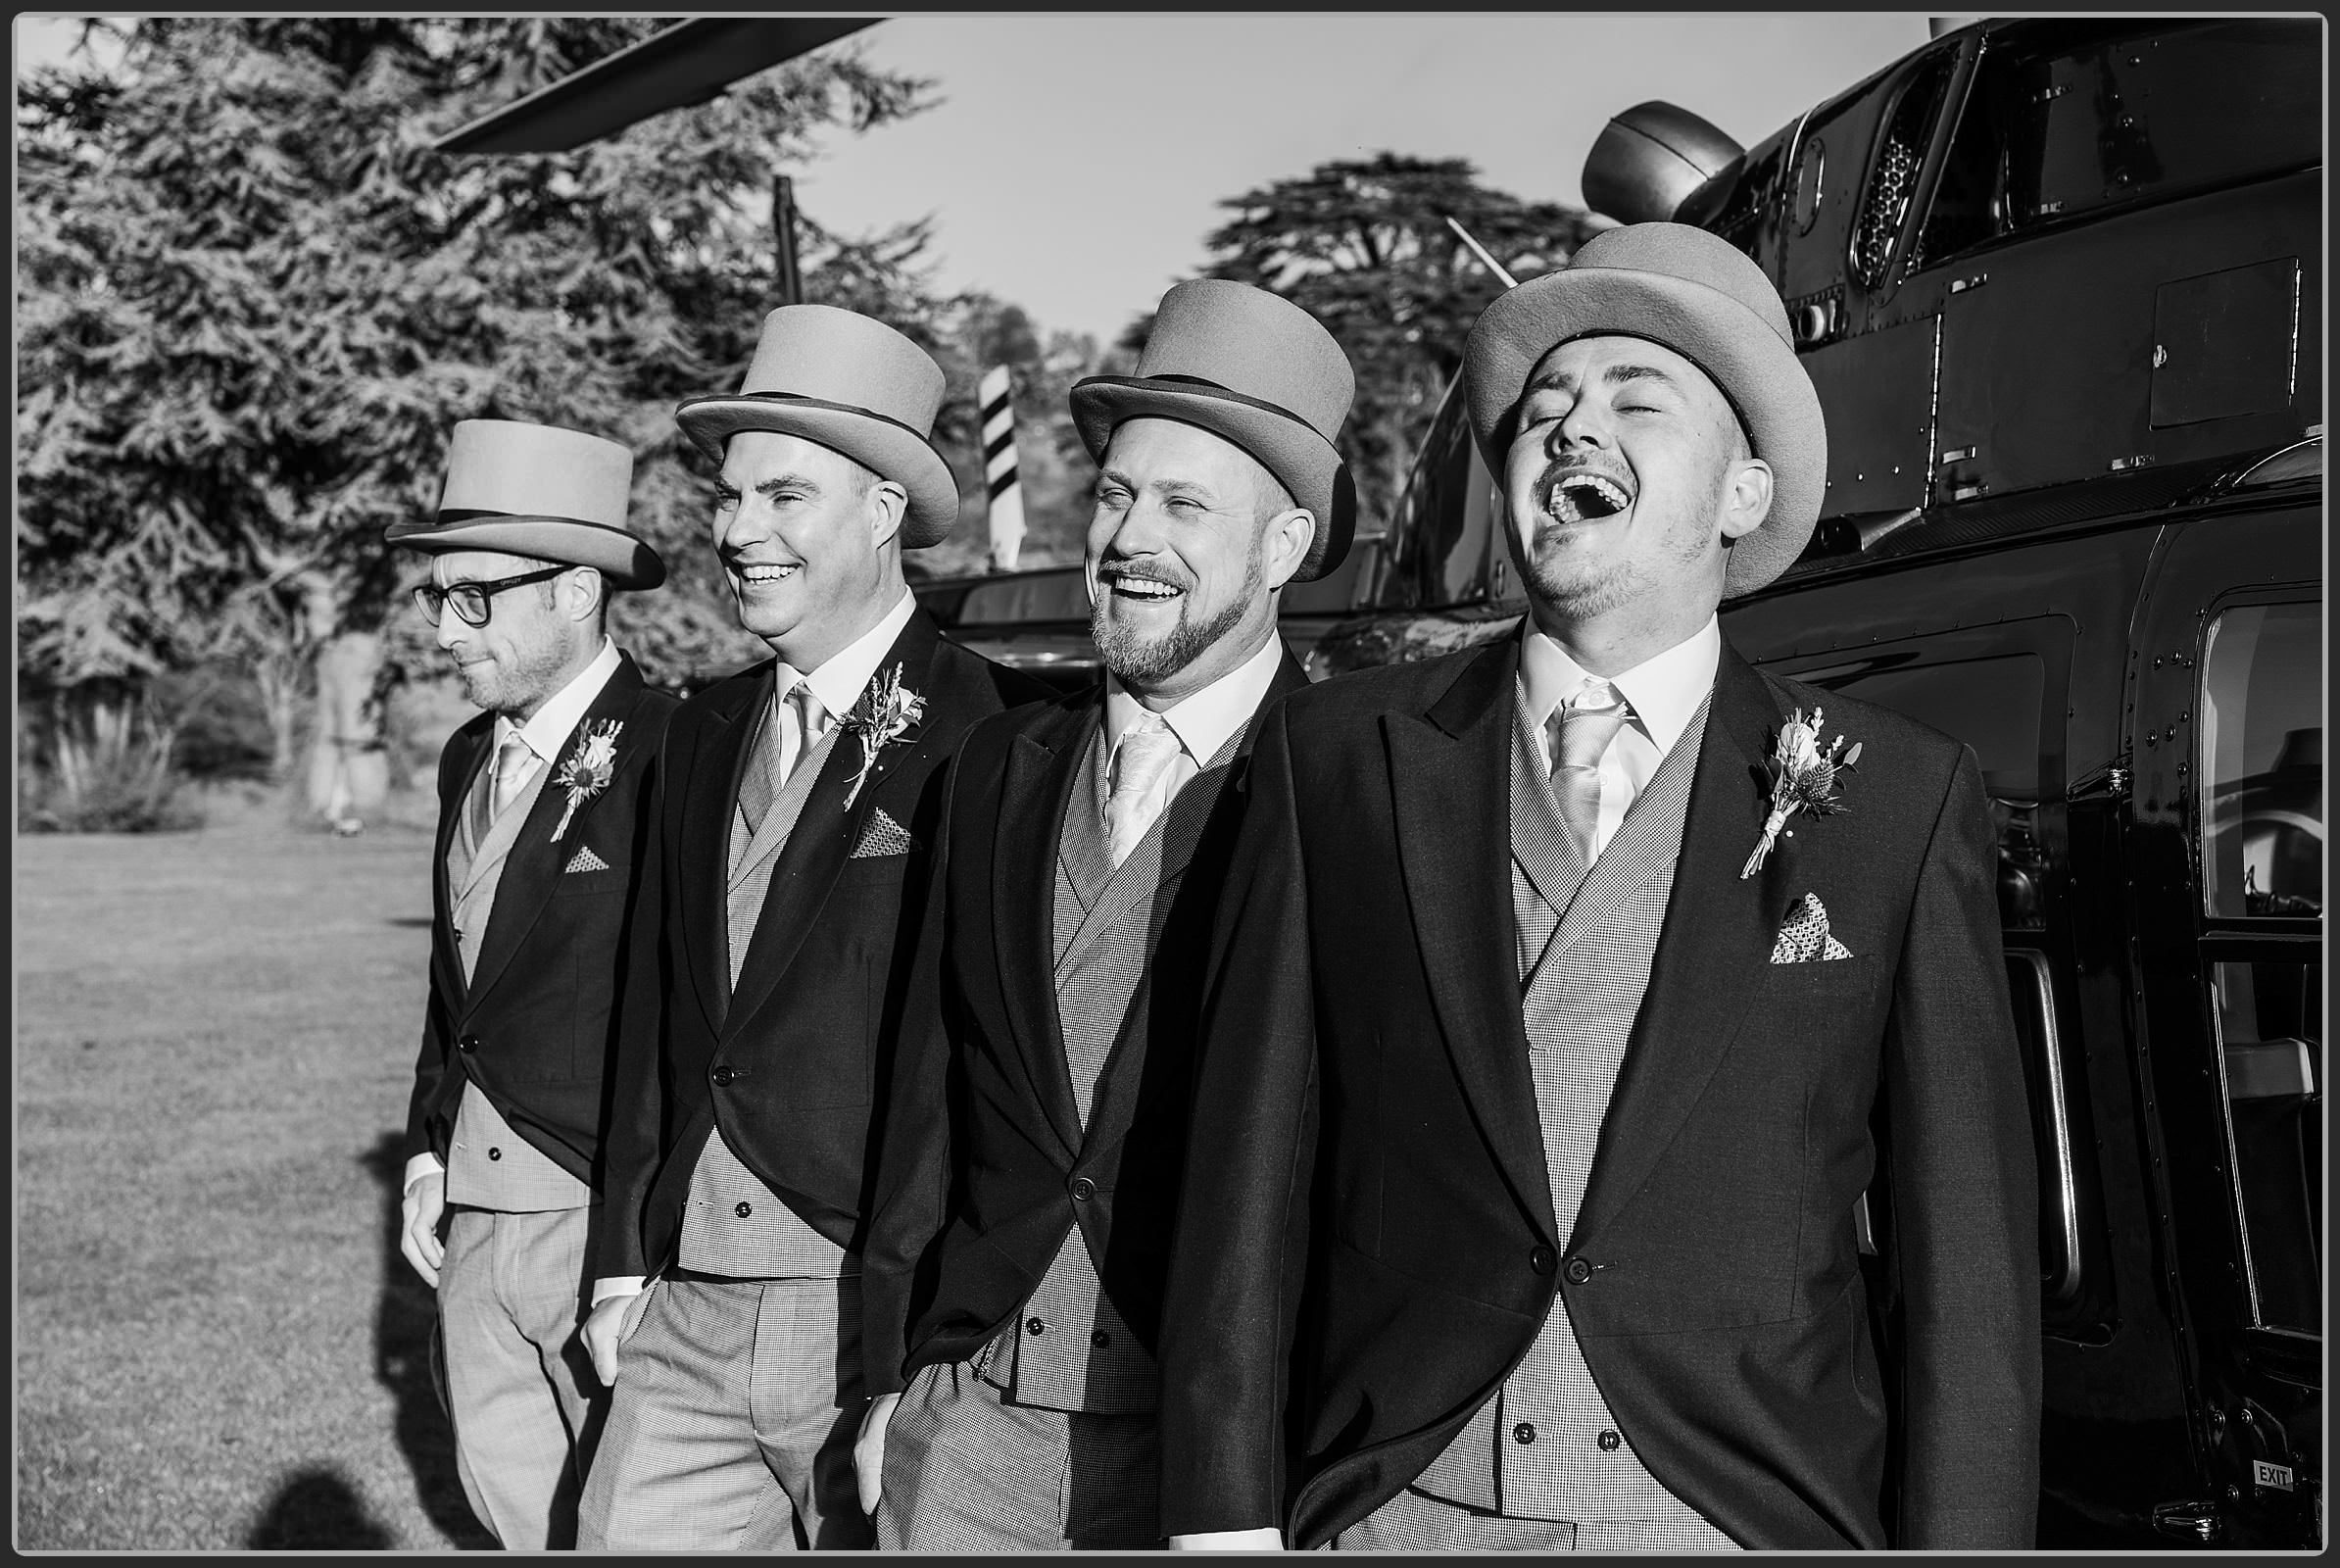 Groom and groomsmen by the helicopter laughing